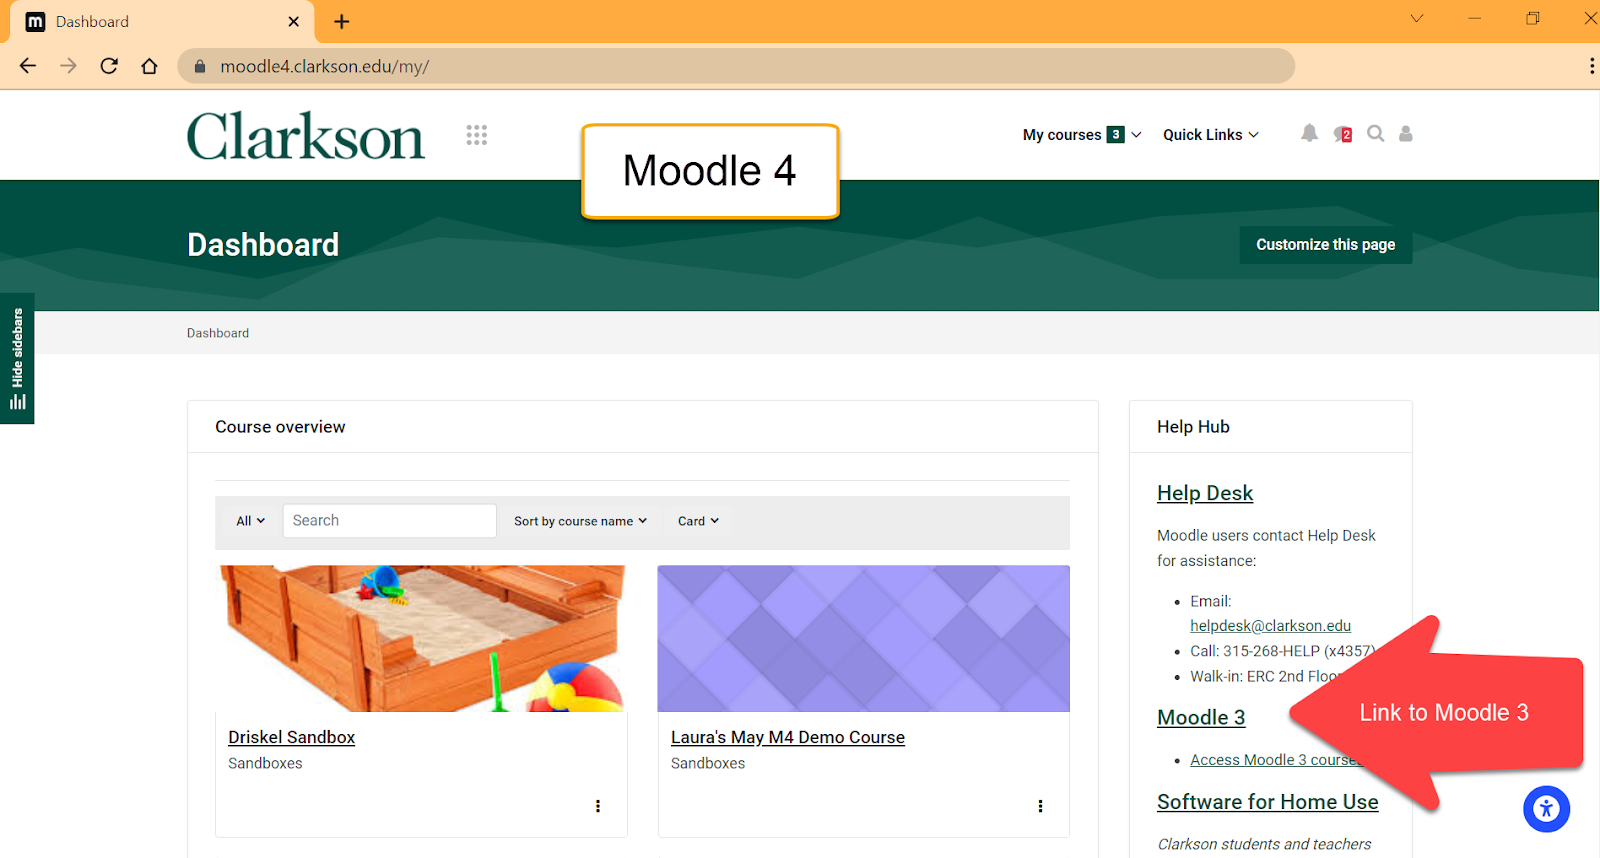 Screen capture of Moodle 4 Dashboard. Link to Moodle 3 indicated with a red arrow in the Help Hub block on the right. 